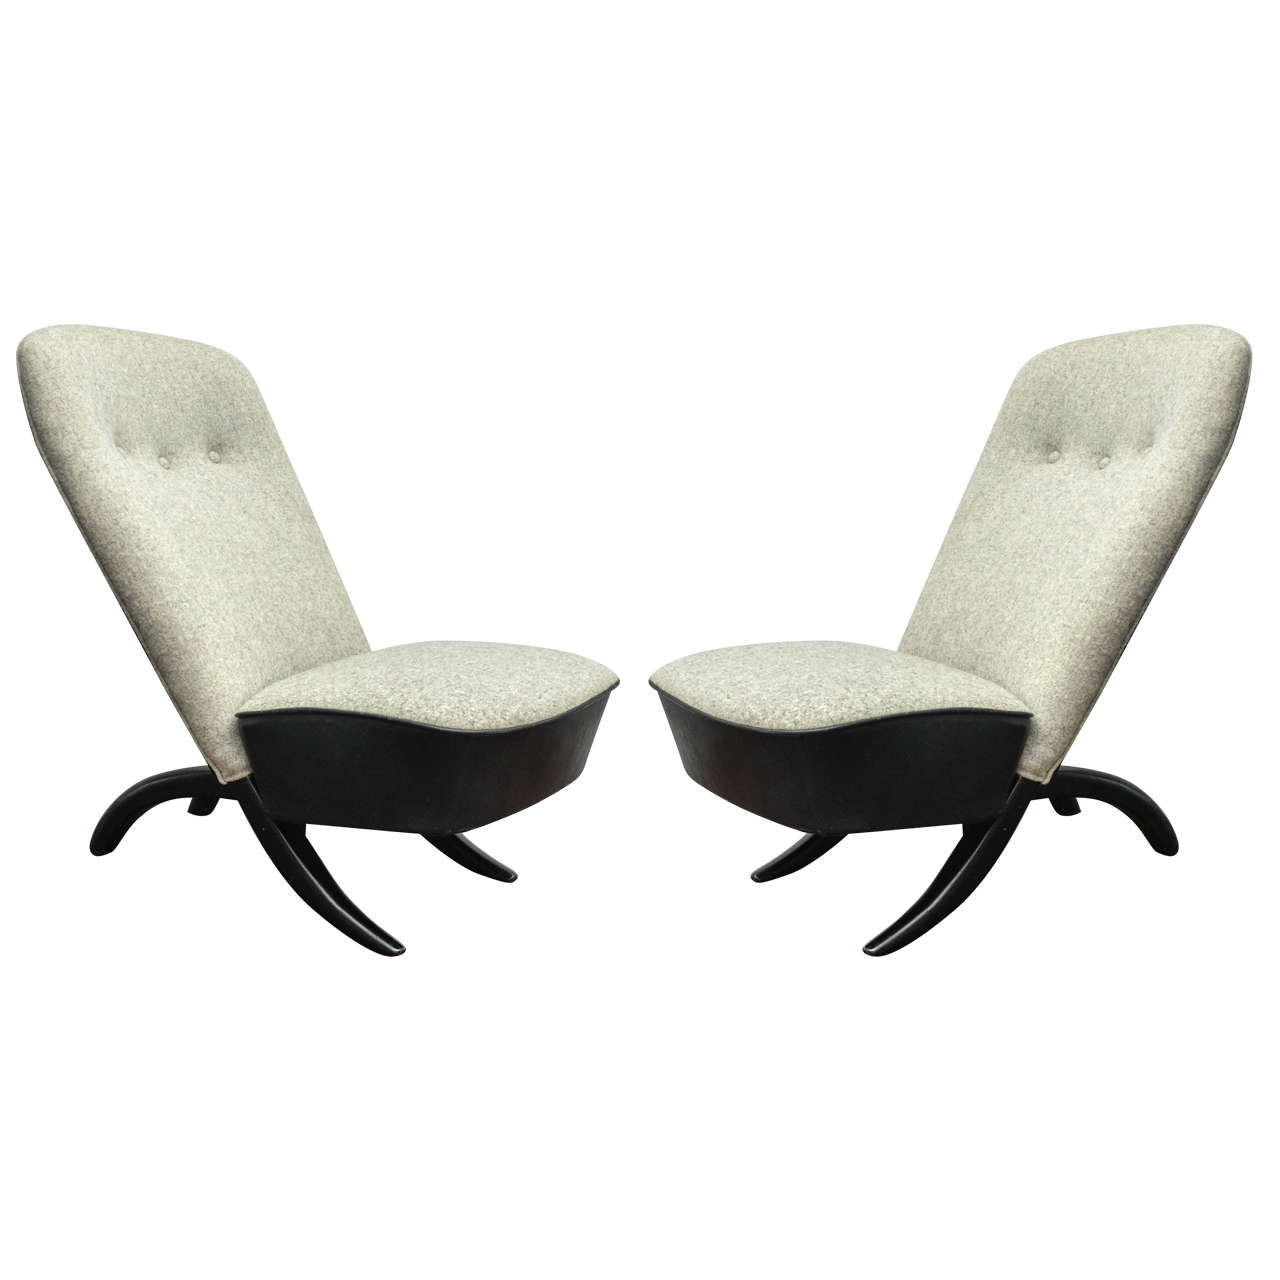 Pair of Theo Ruth Chairs